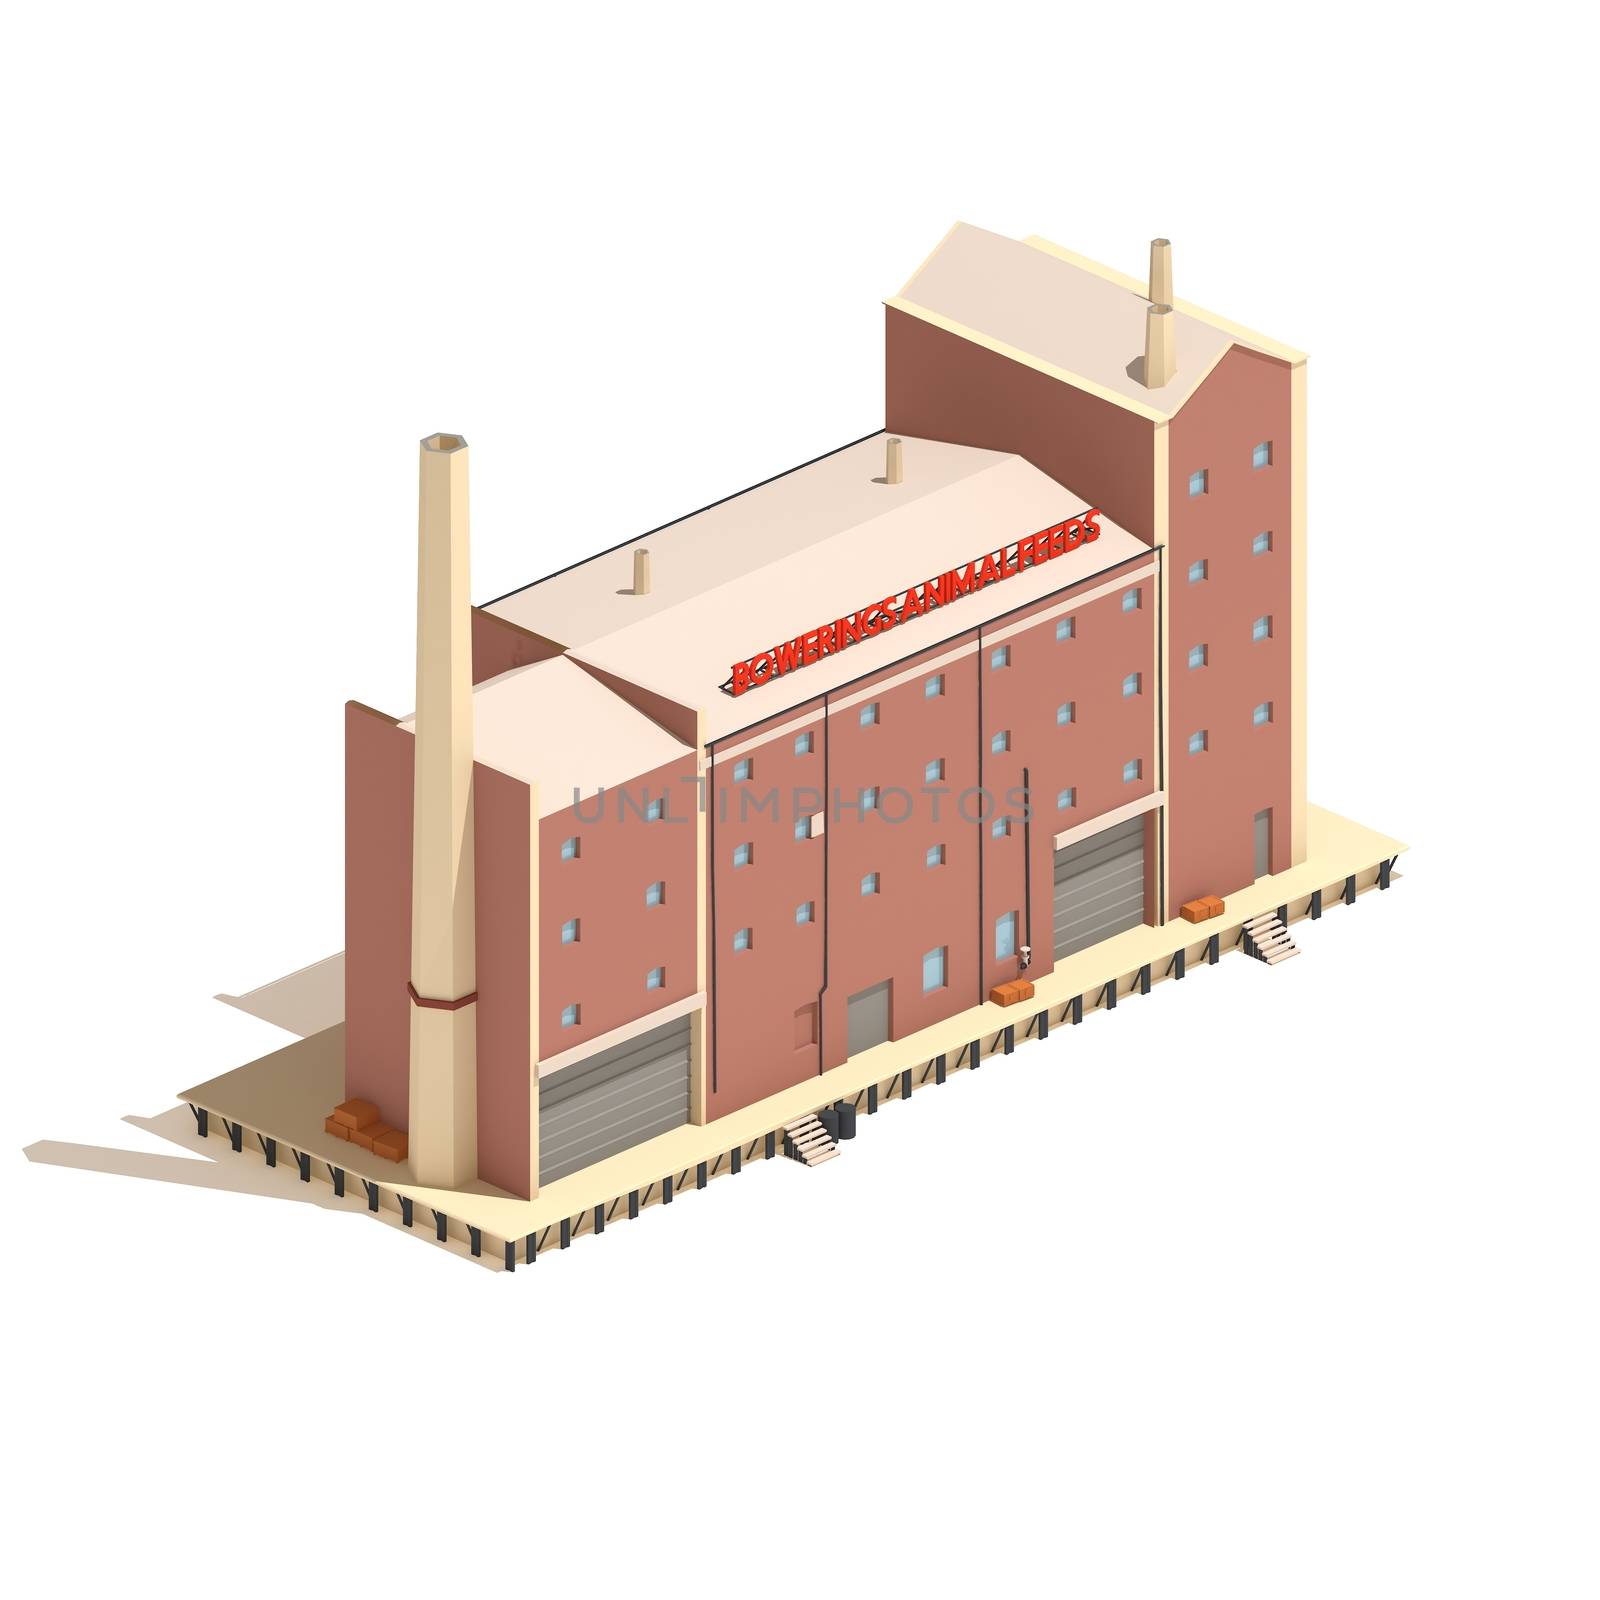 Flat 3d model isometric red brick industry or factory building illustration isolated on white background. by ingalinder